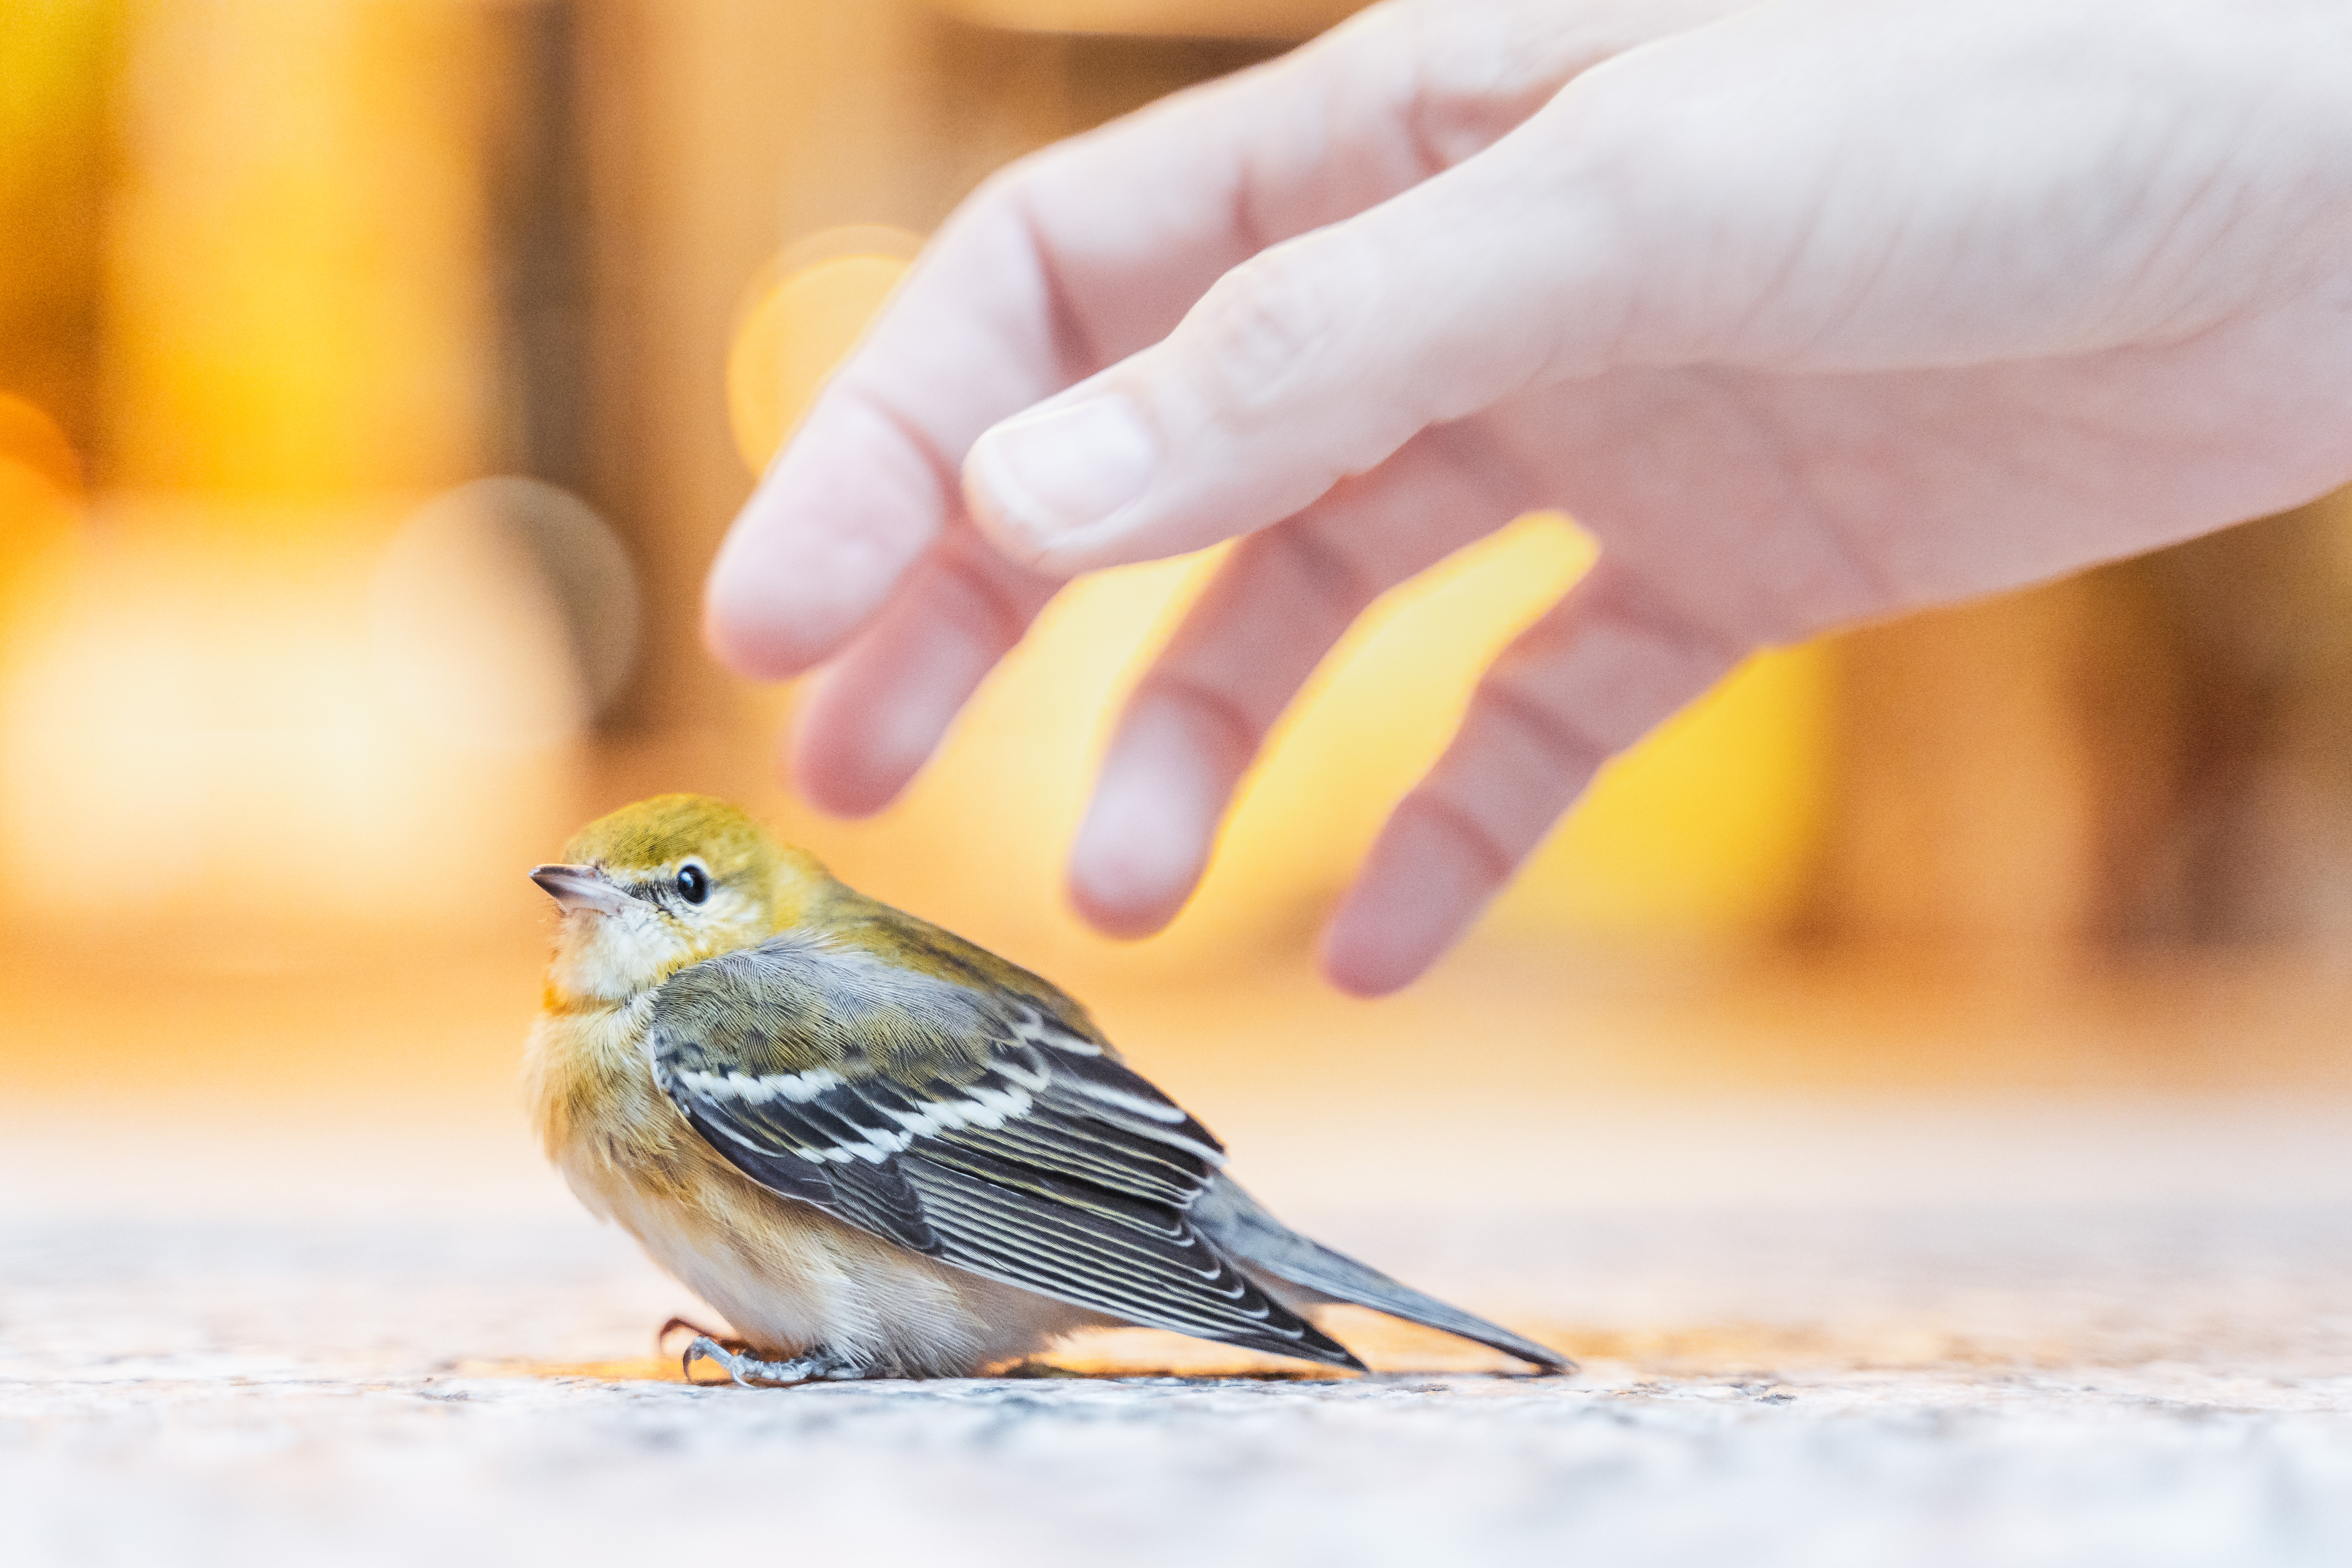 A Bay-breasted Warbler, stunned after colliding with a window at Brookfield Place, remains motionless as the hand of a Project Safe Flight volunteer reaches out to contain it. Photo by Winston Qin. 